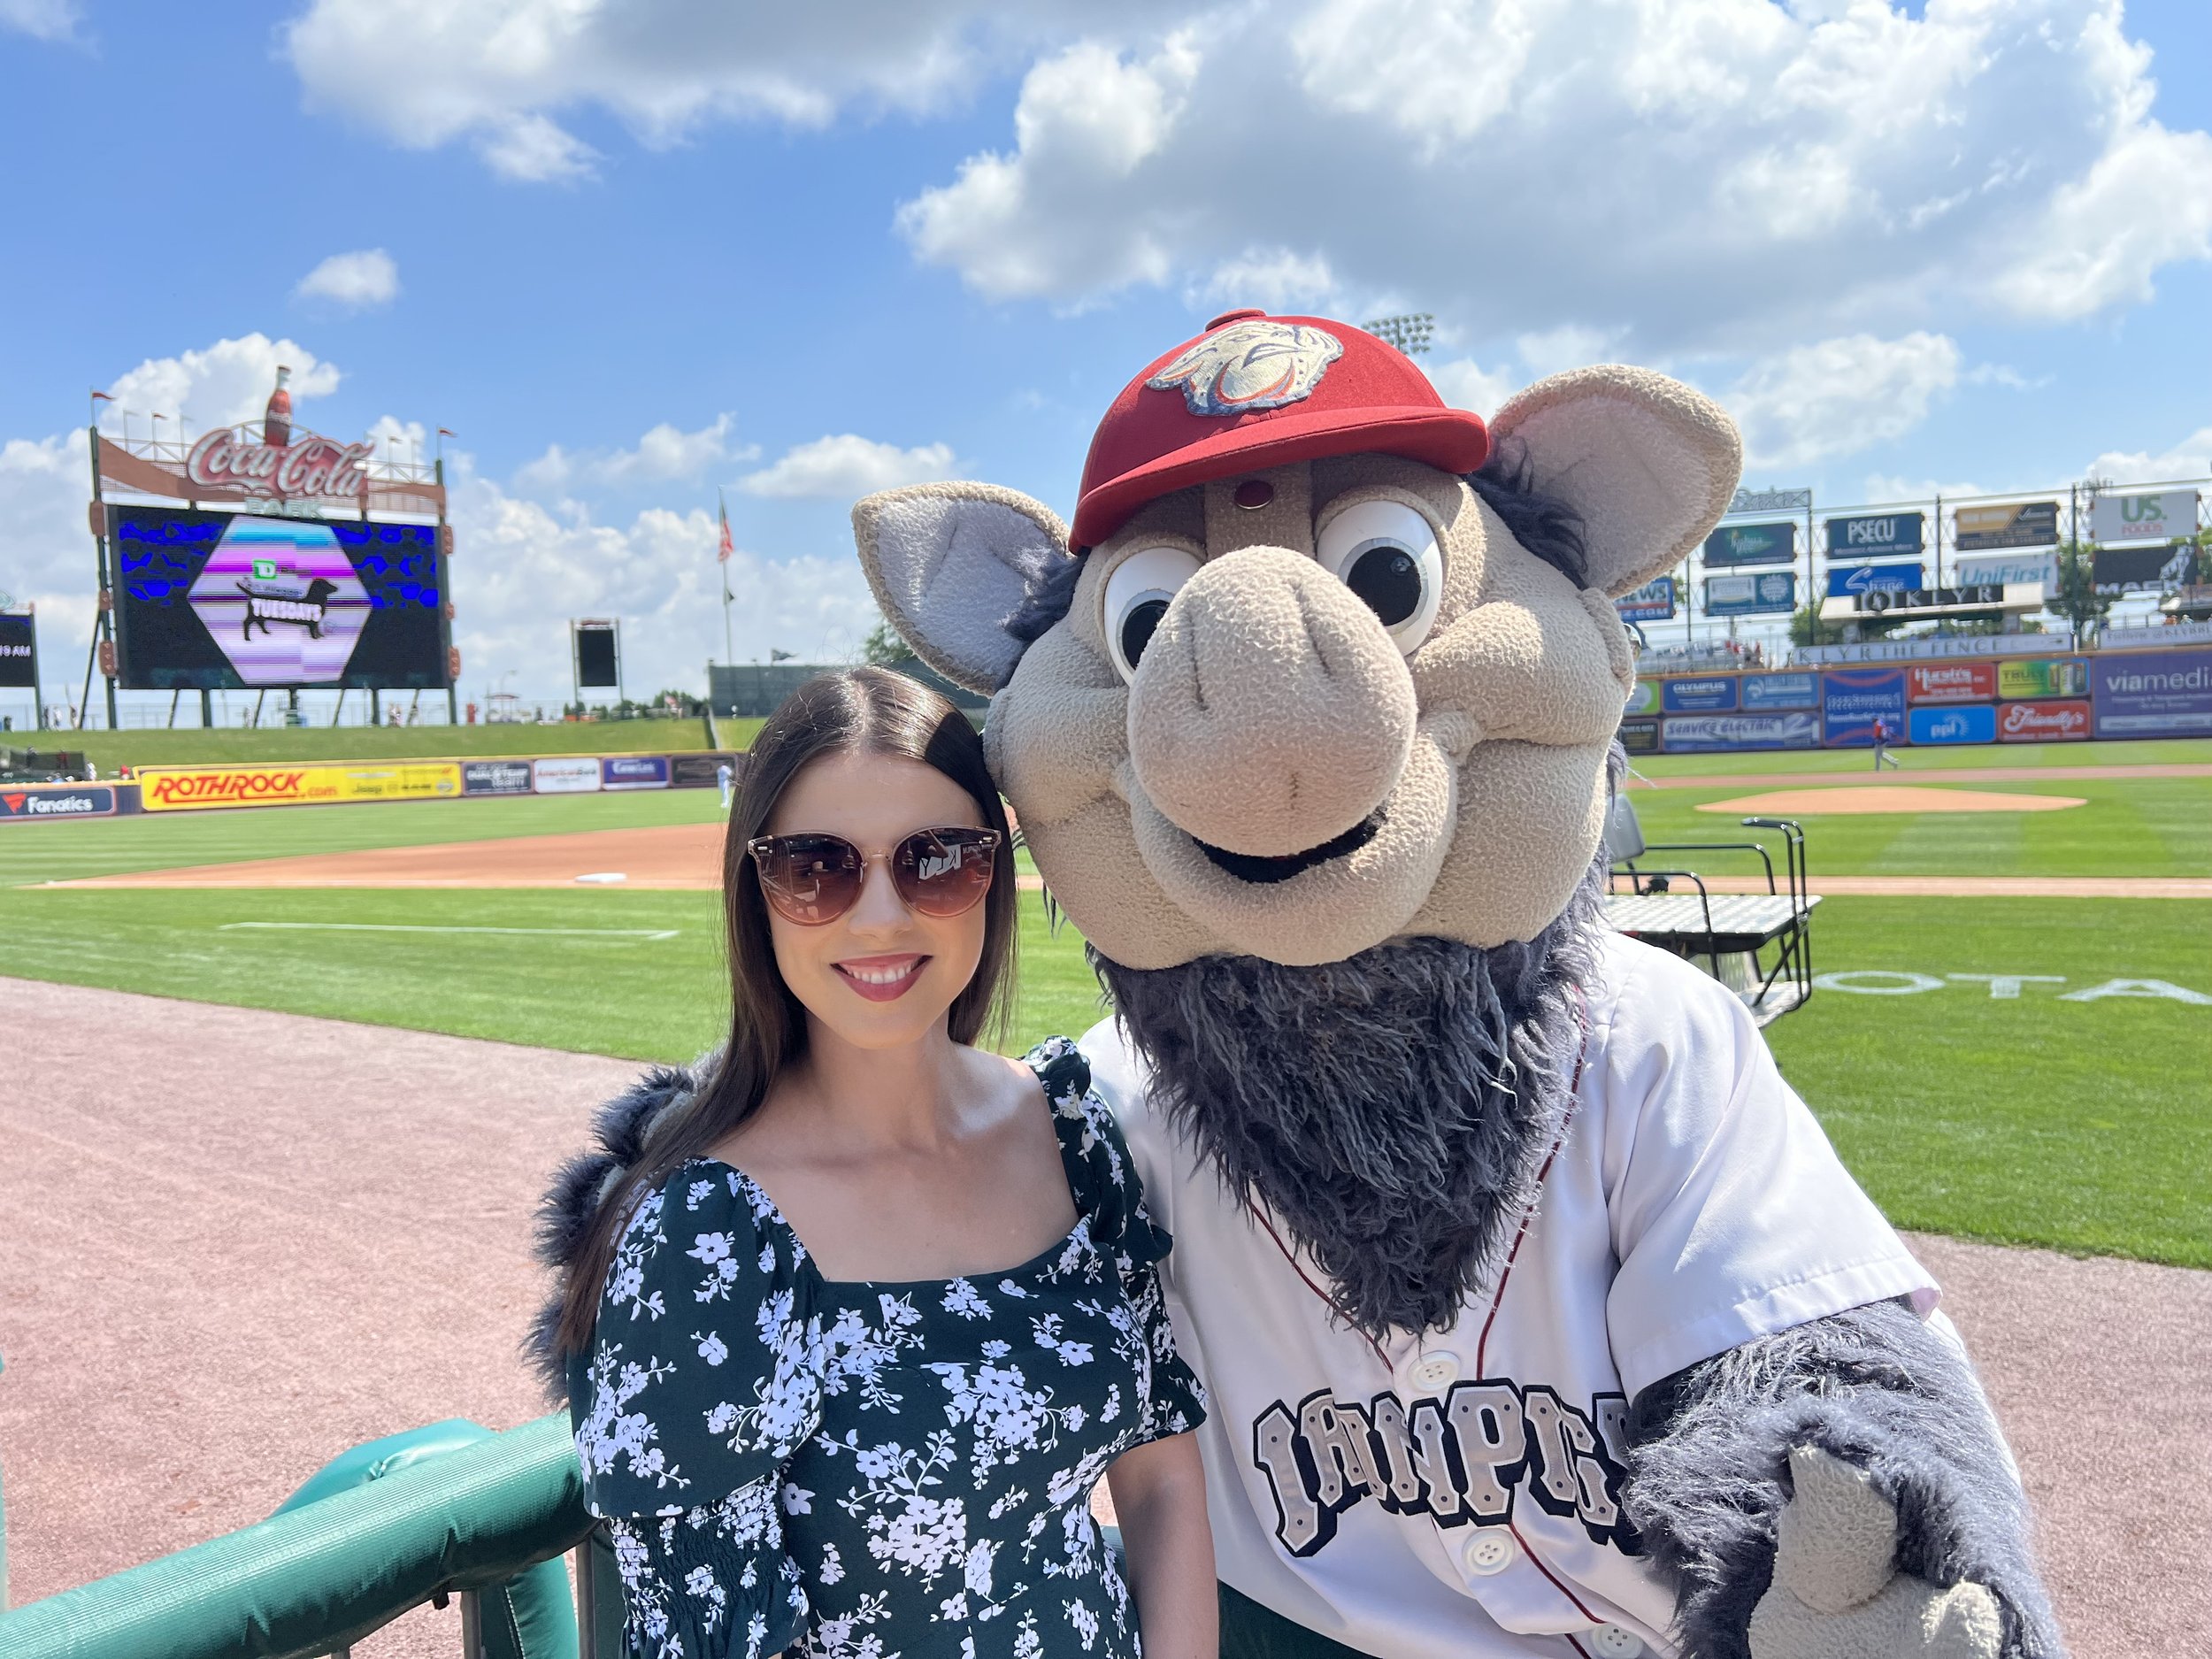 With The Iron Pigs Mascot, Ferrous!